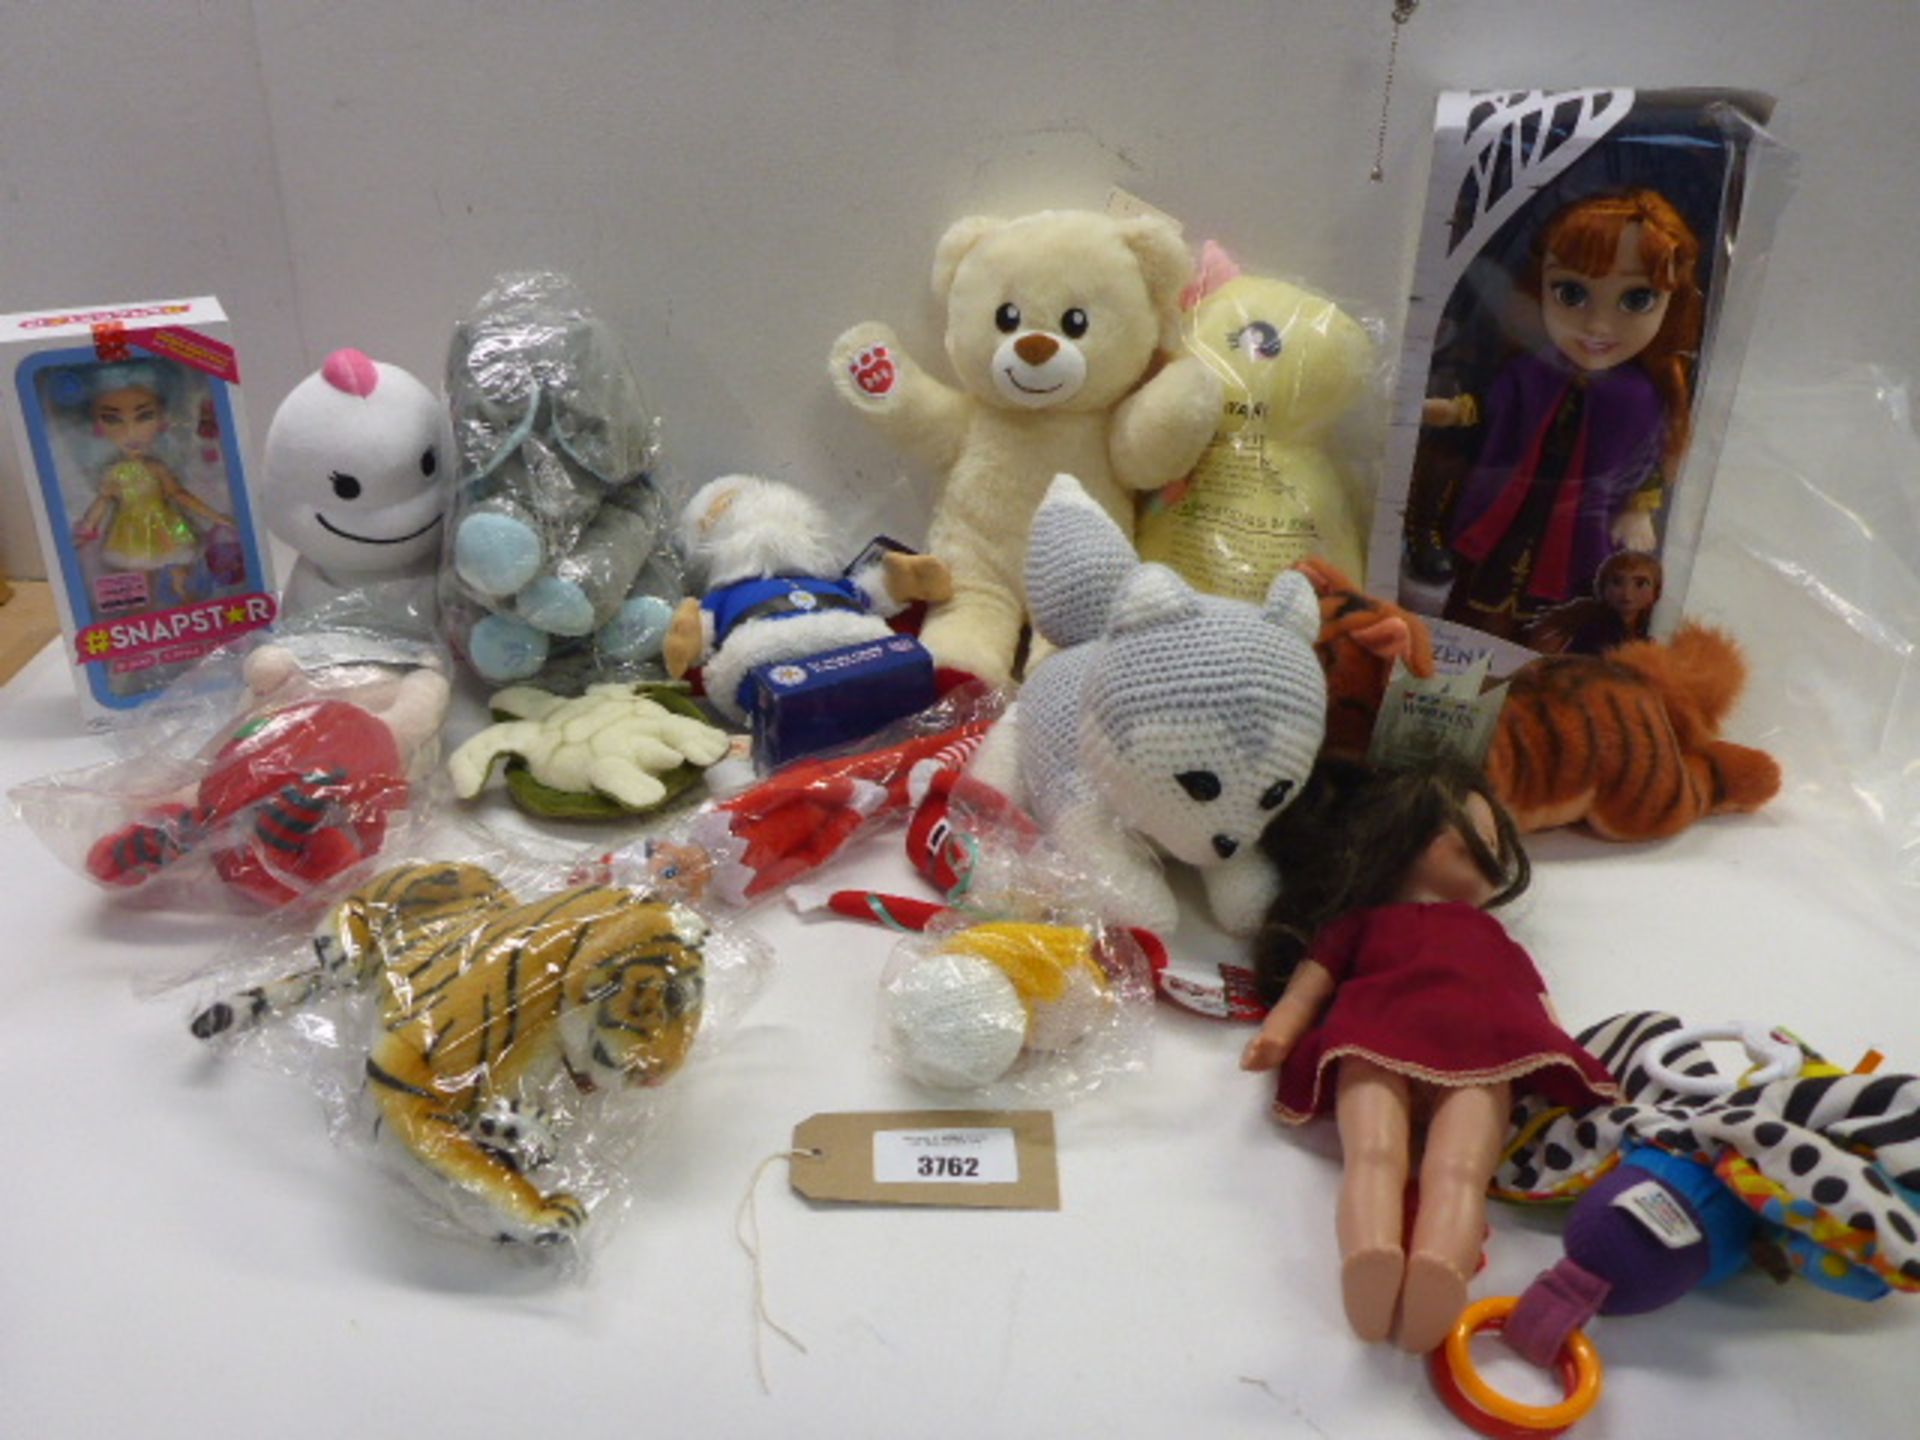 Frozen & Snap Star dolls and selection of soft cuddly toys